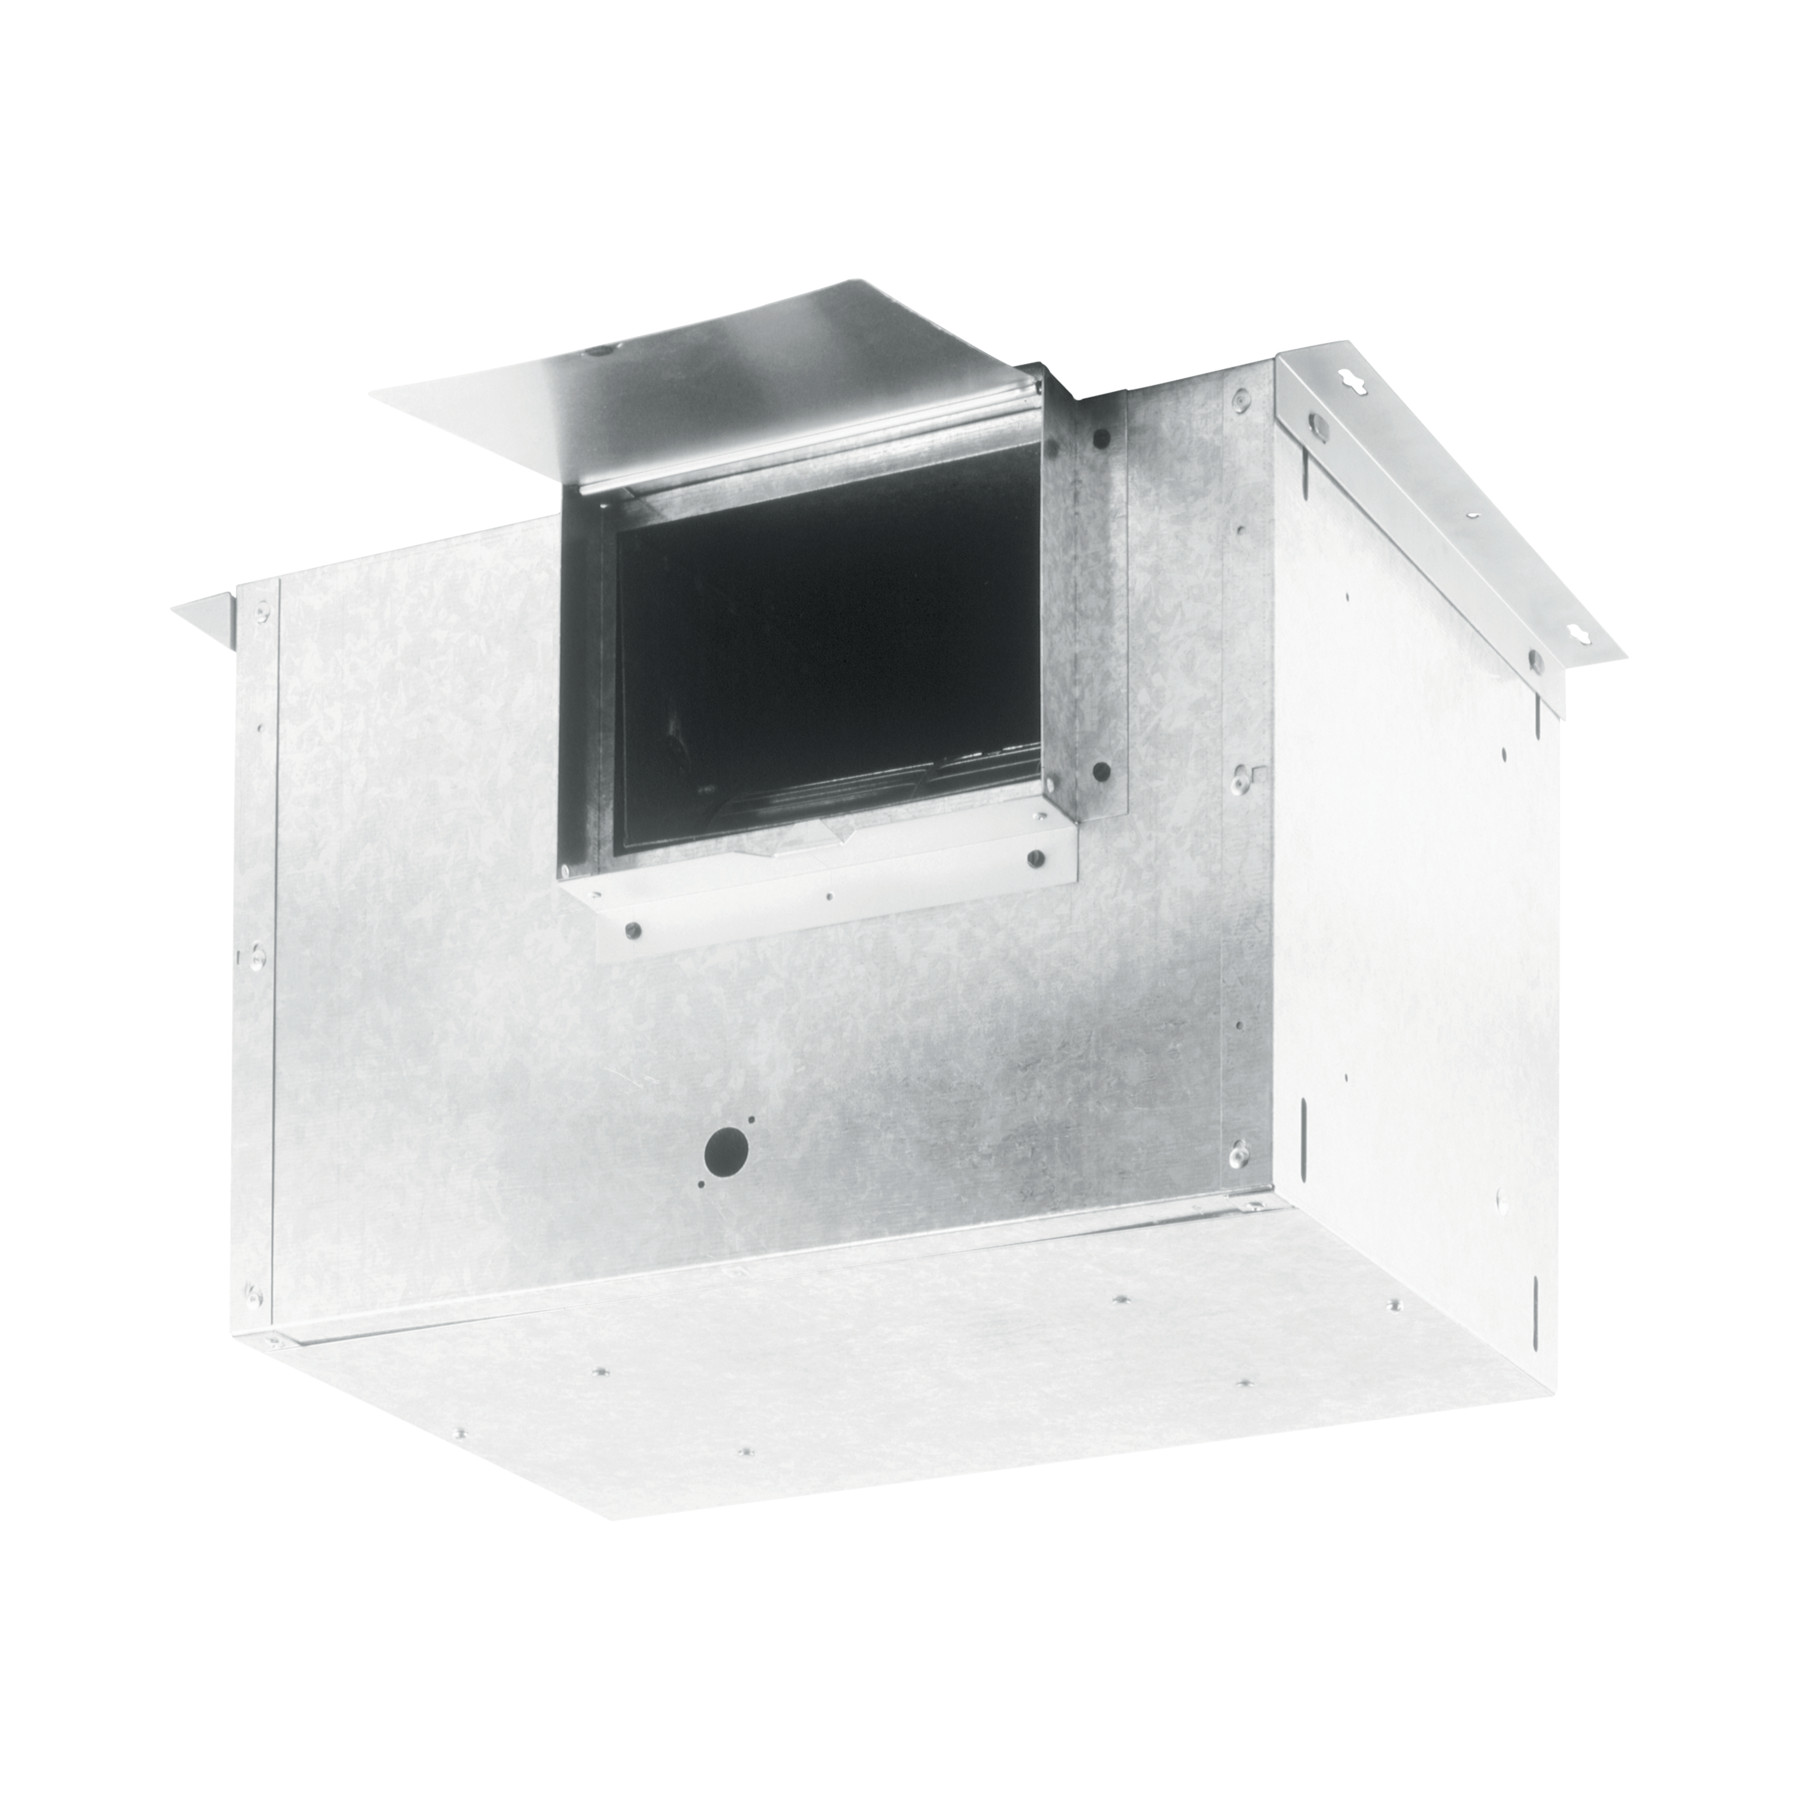 **DISCONTINUED** Broan® Ventilation Fan; 894 CFM Straight Through, 3.8 Sones; 858 CFM Right Angle, 3.4 Sones